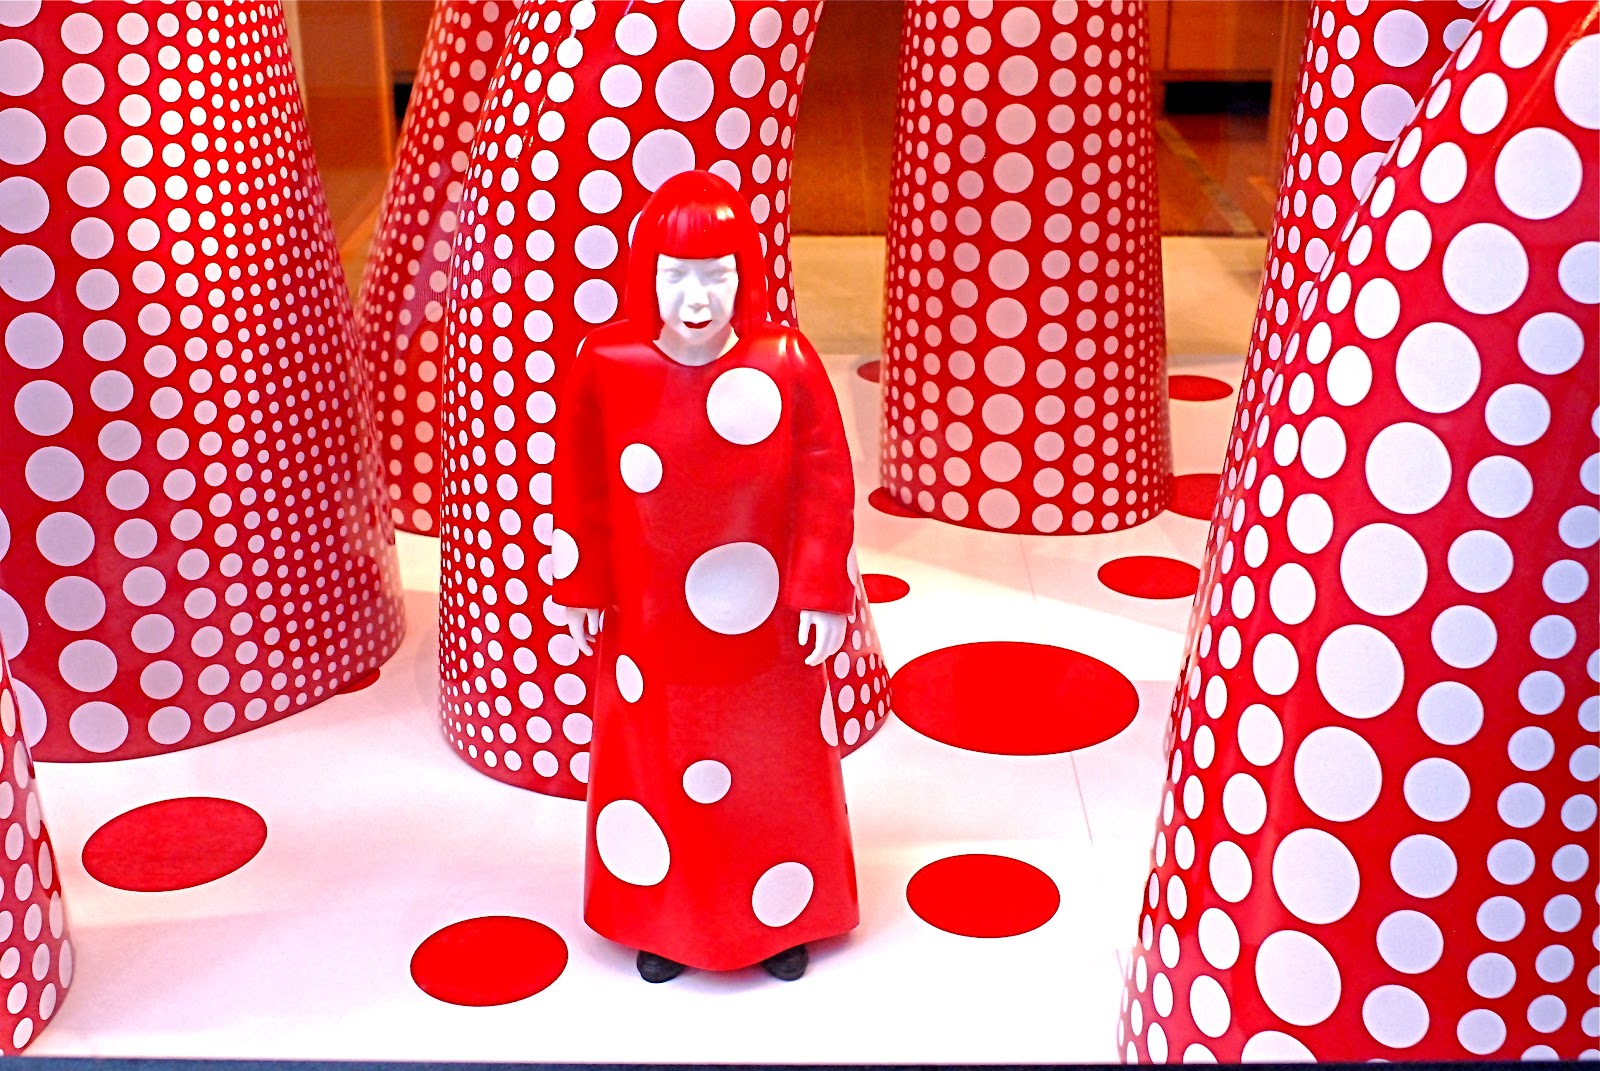 The facade of the Louis Vuitton Store displays a Yayoi Kusama robot News  Photo - Getty Images